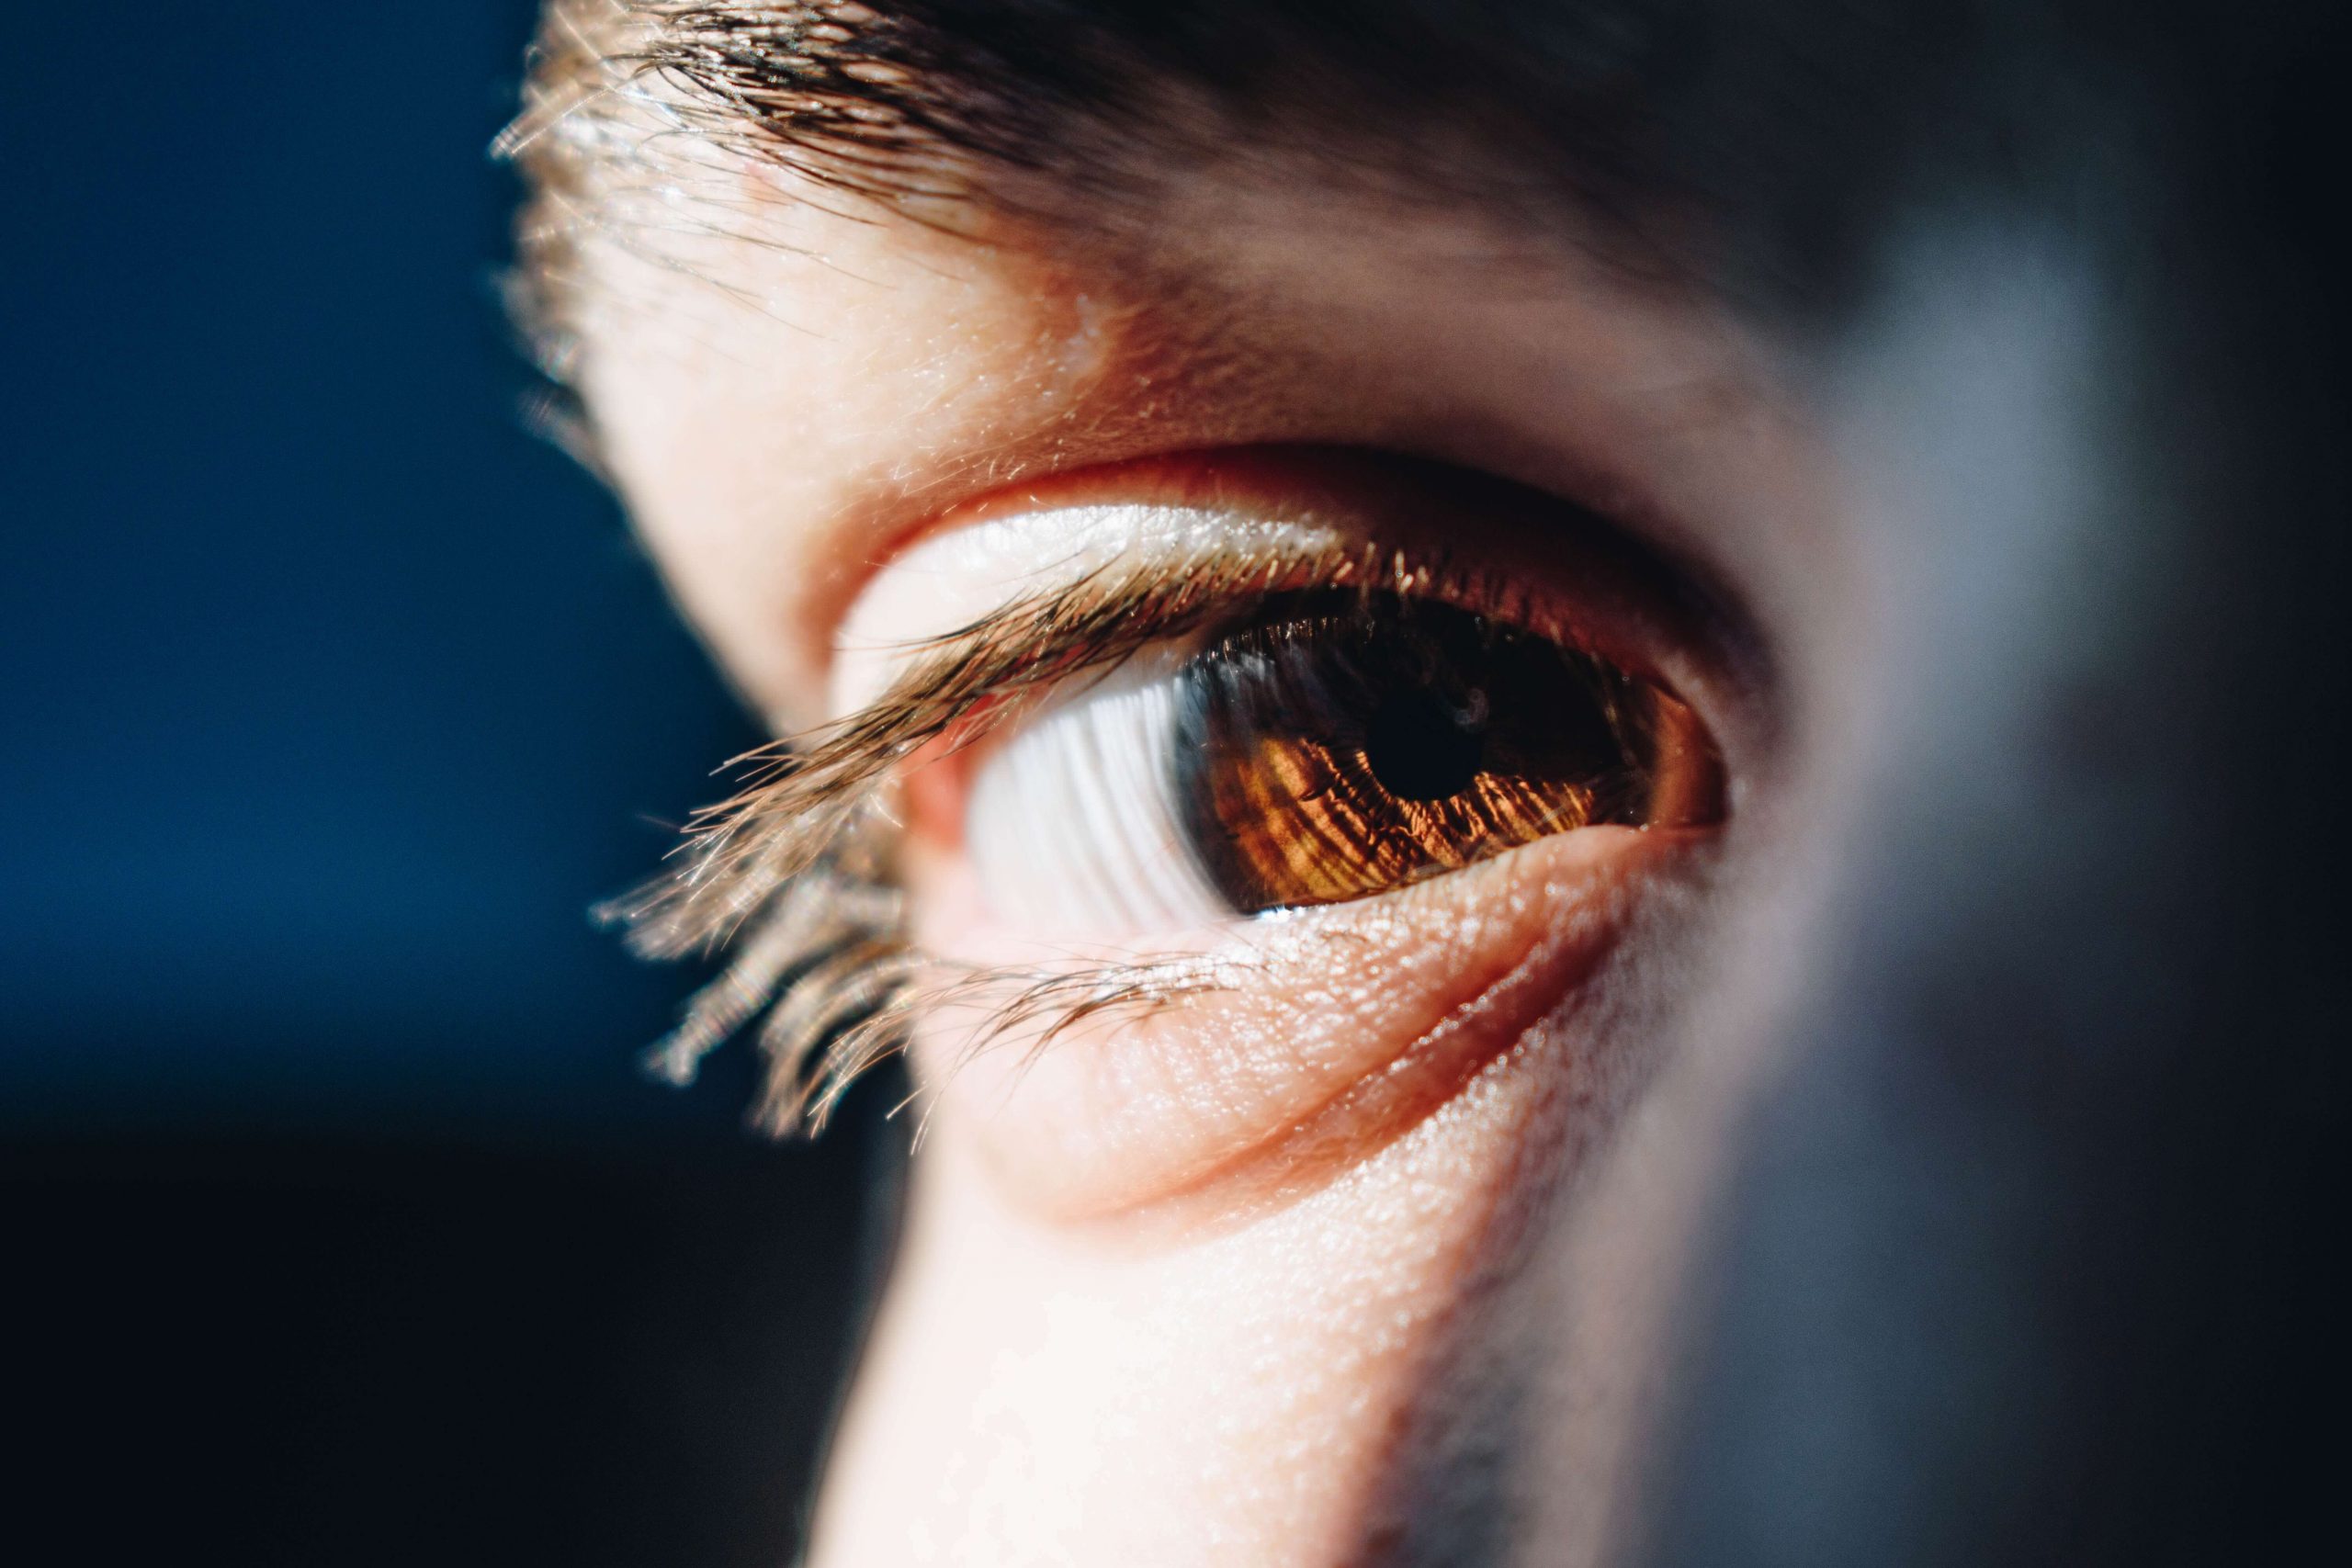 Closeup image of a man's face showing his brown eye. Do you struggle with anxiety? Discover how EMDR therapy in Denver, CO can help you overcome your symptoms.